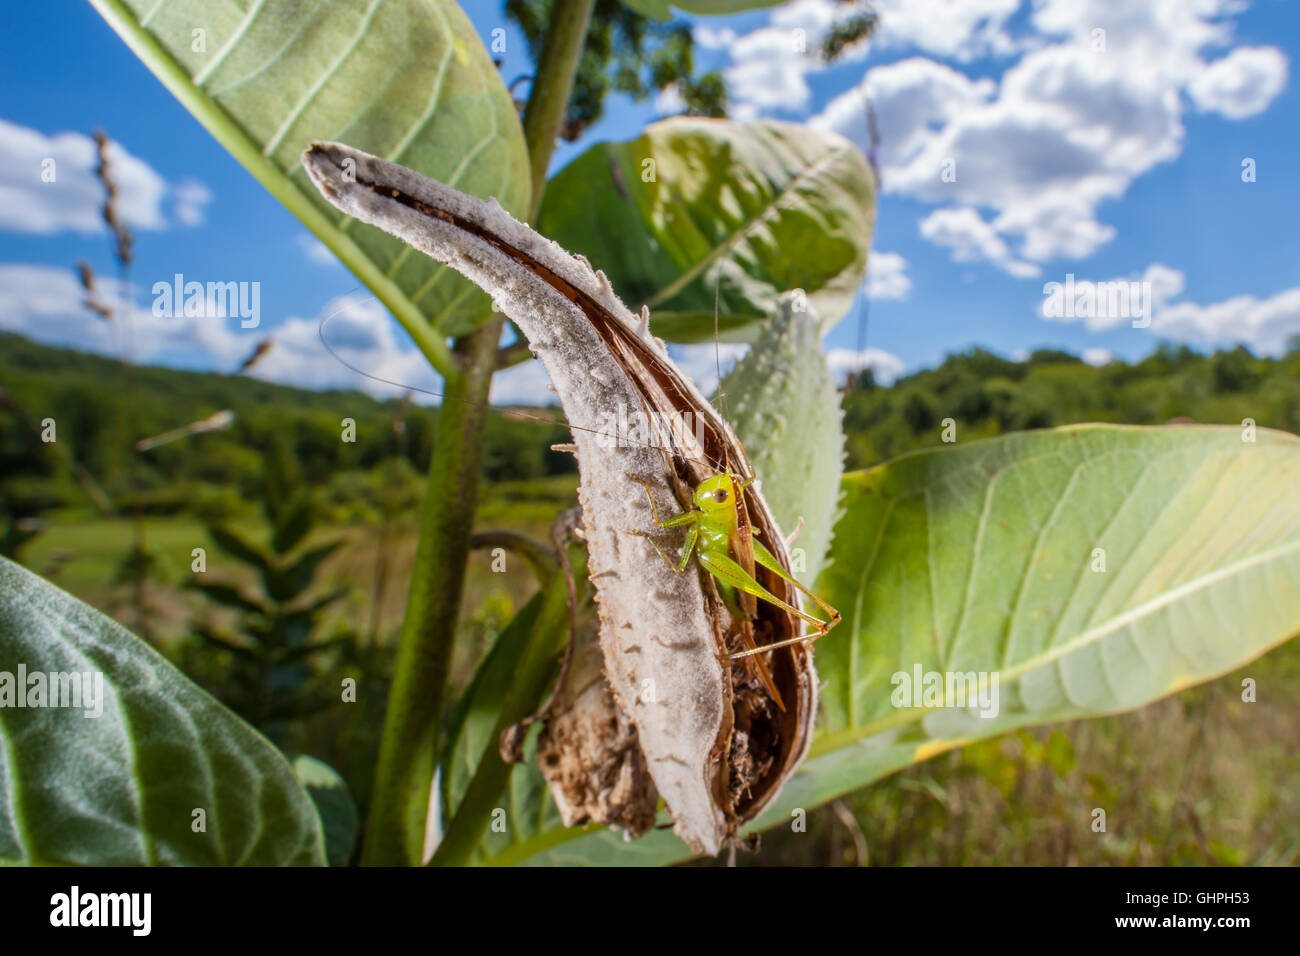 A female Short-winged Meadow Katydid (Conocephalus brevipennis) perches inside a Common Milkweed seed pod. Stock Photo